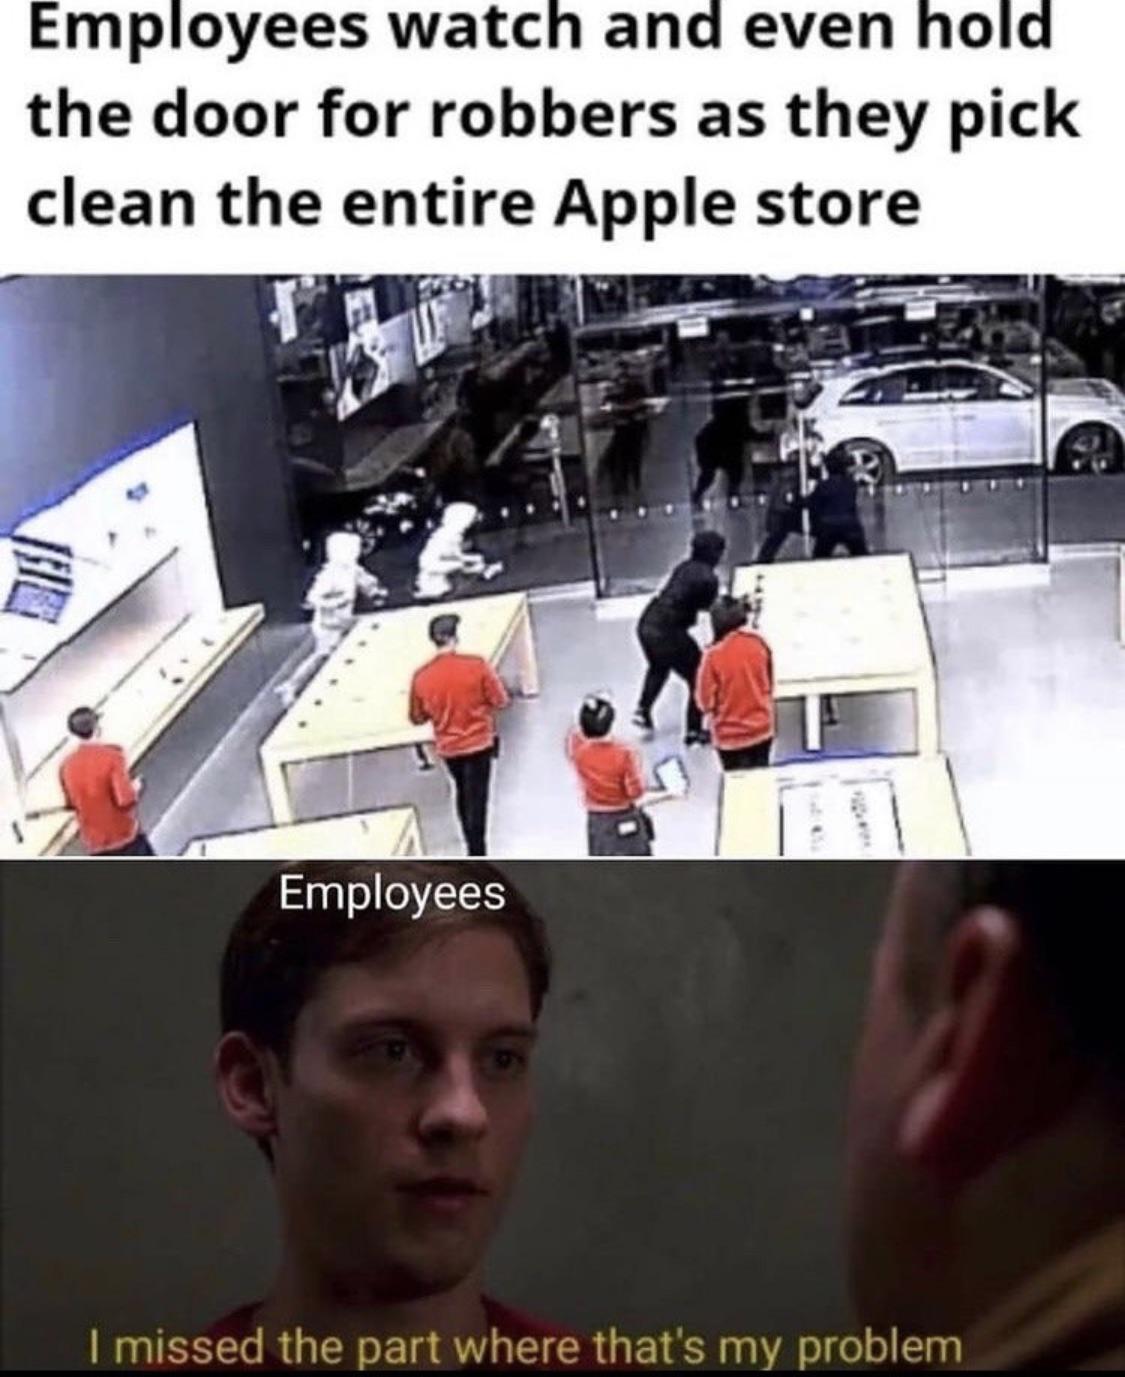 funny memes - dank memes - employee watch and even hold the door apples store - Employees watch and even hold the door for robbers as they pick clean the entire Apple store 19 Employees I missed the part where that's my problem